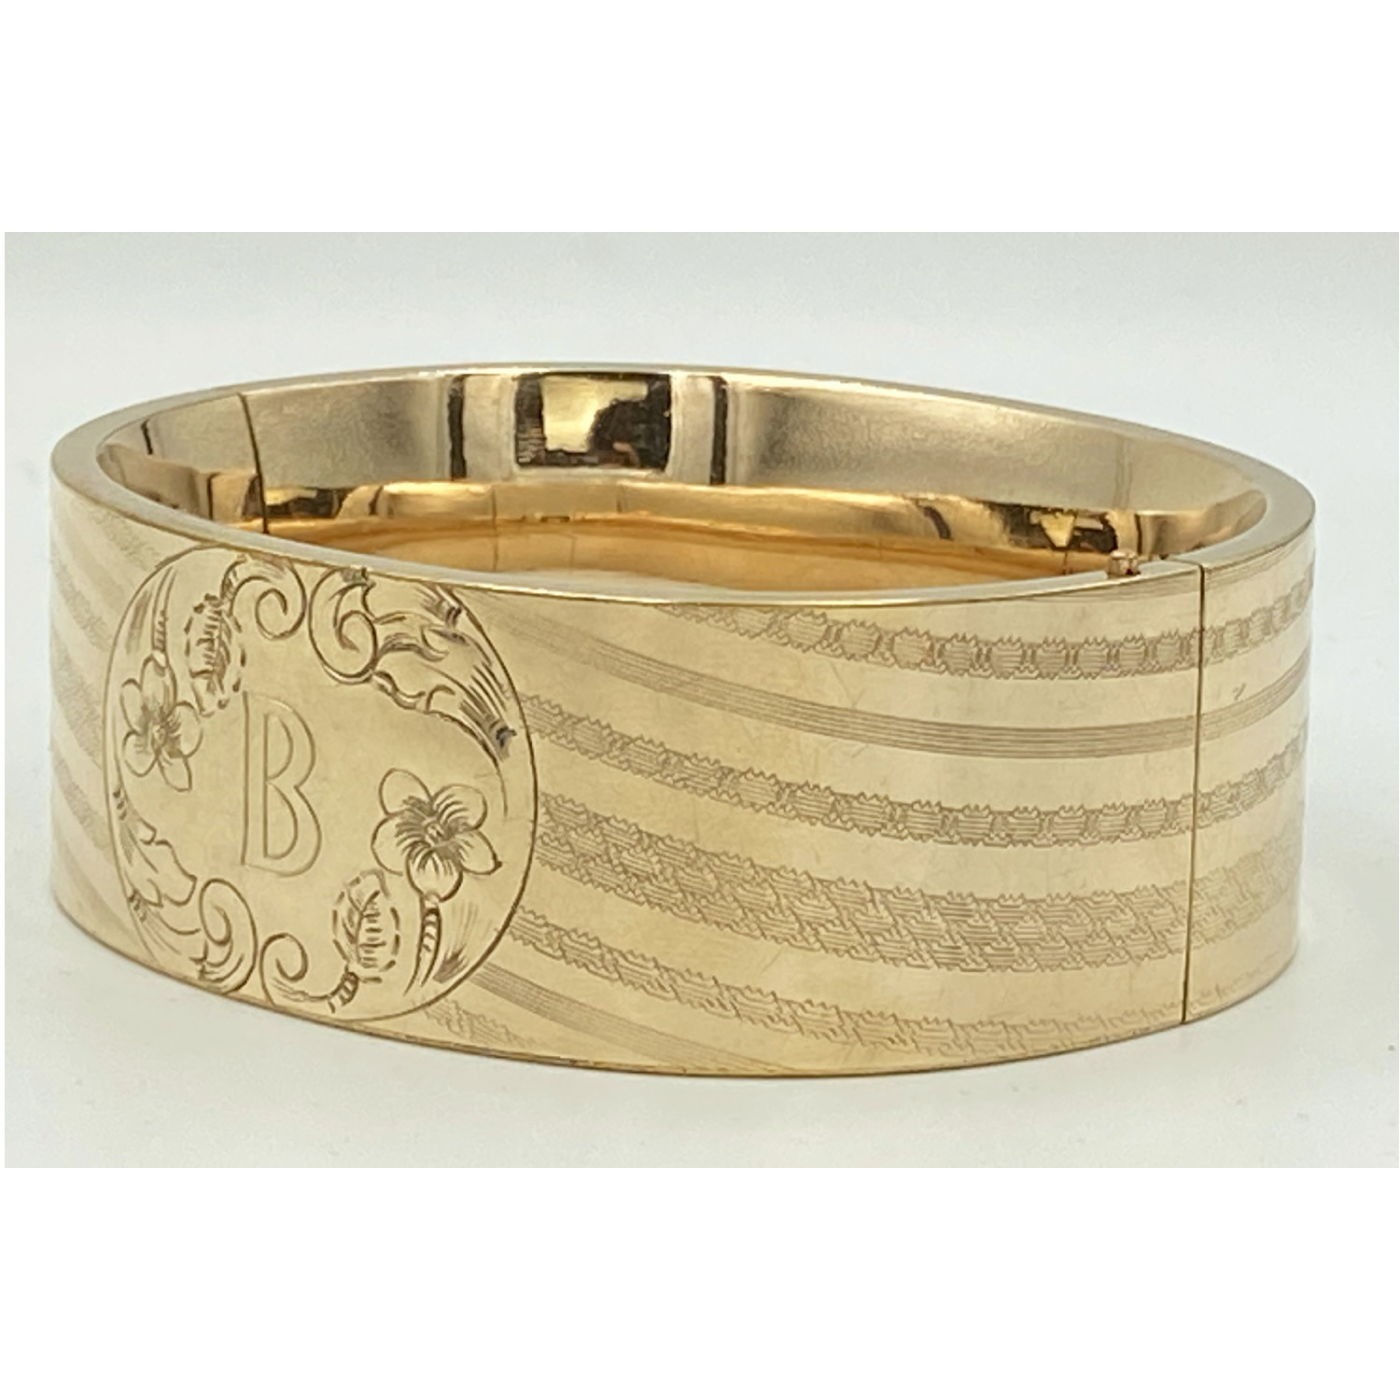 Tailored Extra Wide "B" Monogram Gold-Filled Engagement Bangle